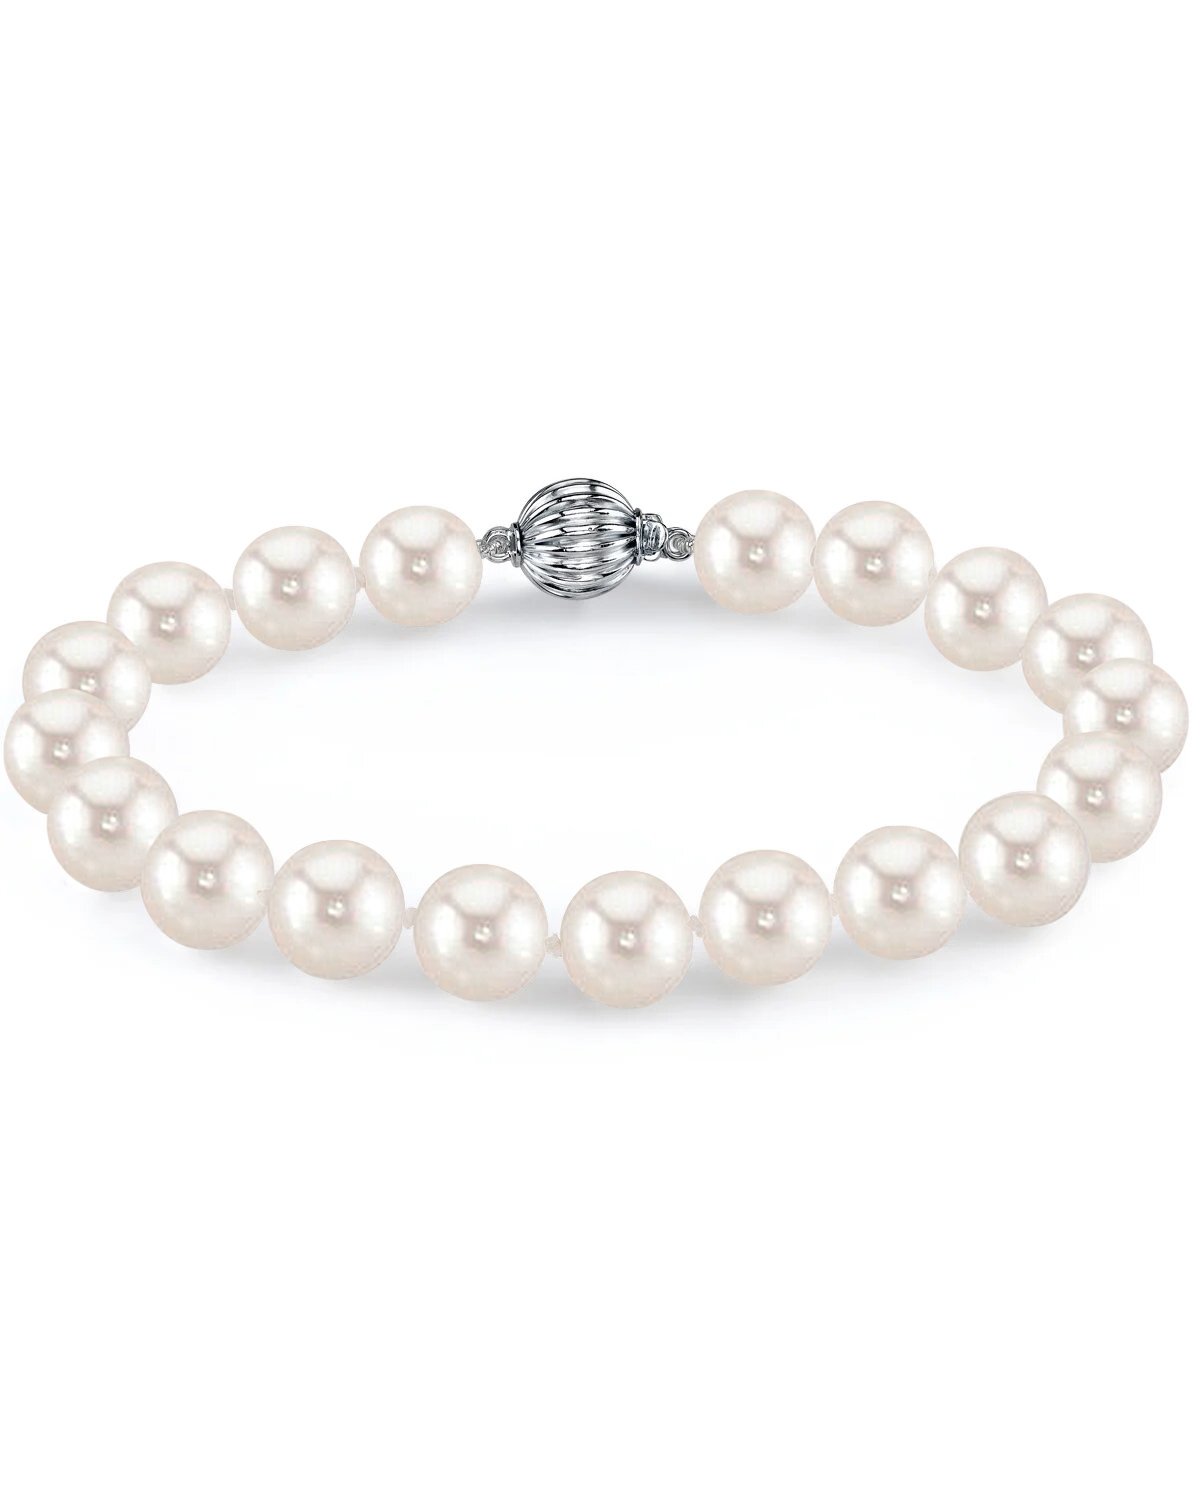 6.5-7.0mm White Freshwater Pearl Bracelet - AAA Quality